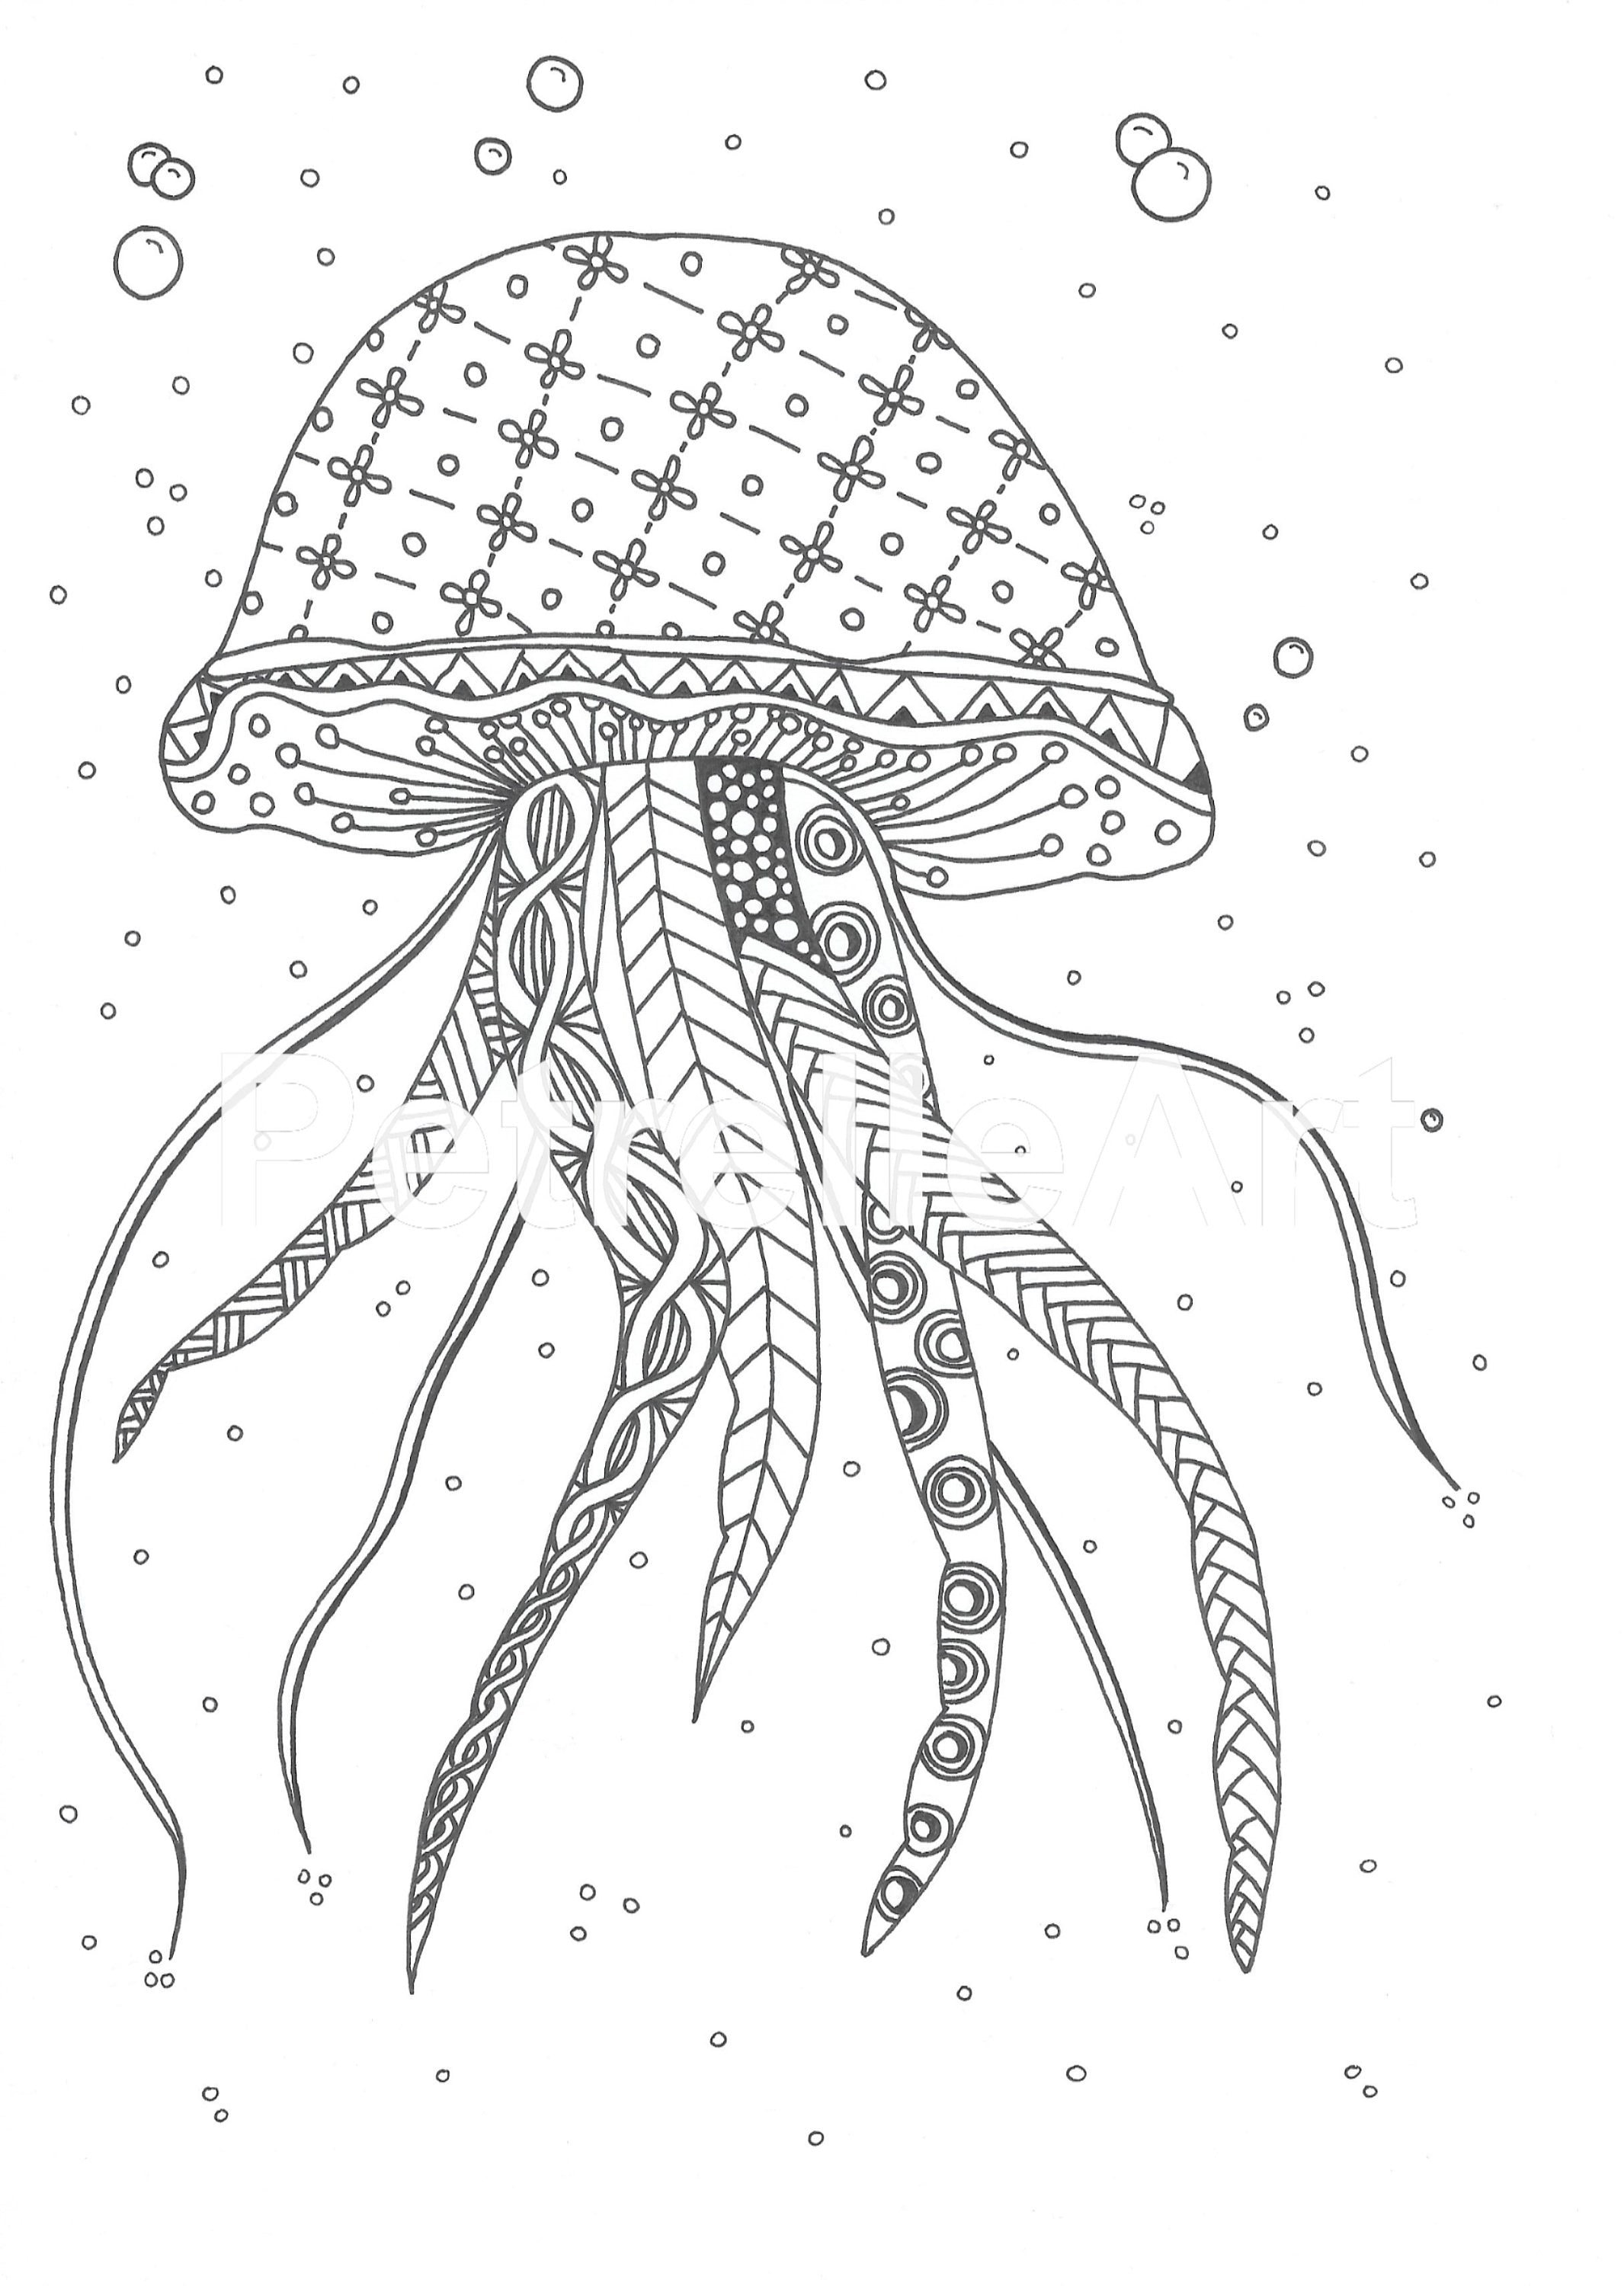 195 Jellyfish Coloring Page Designs: Underwater Beauty in Color 191